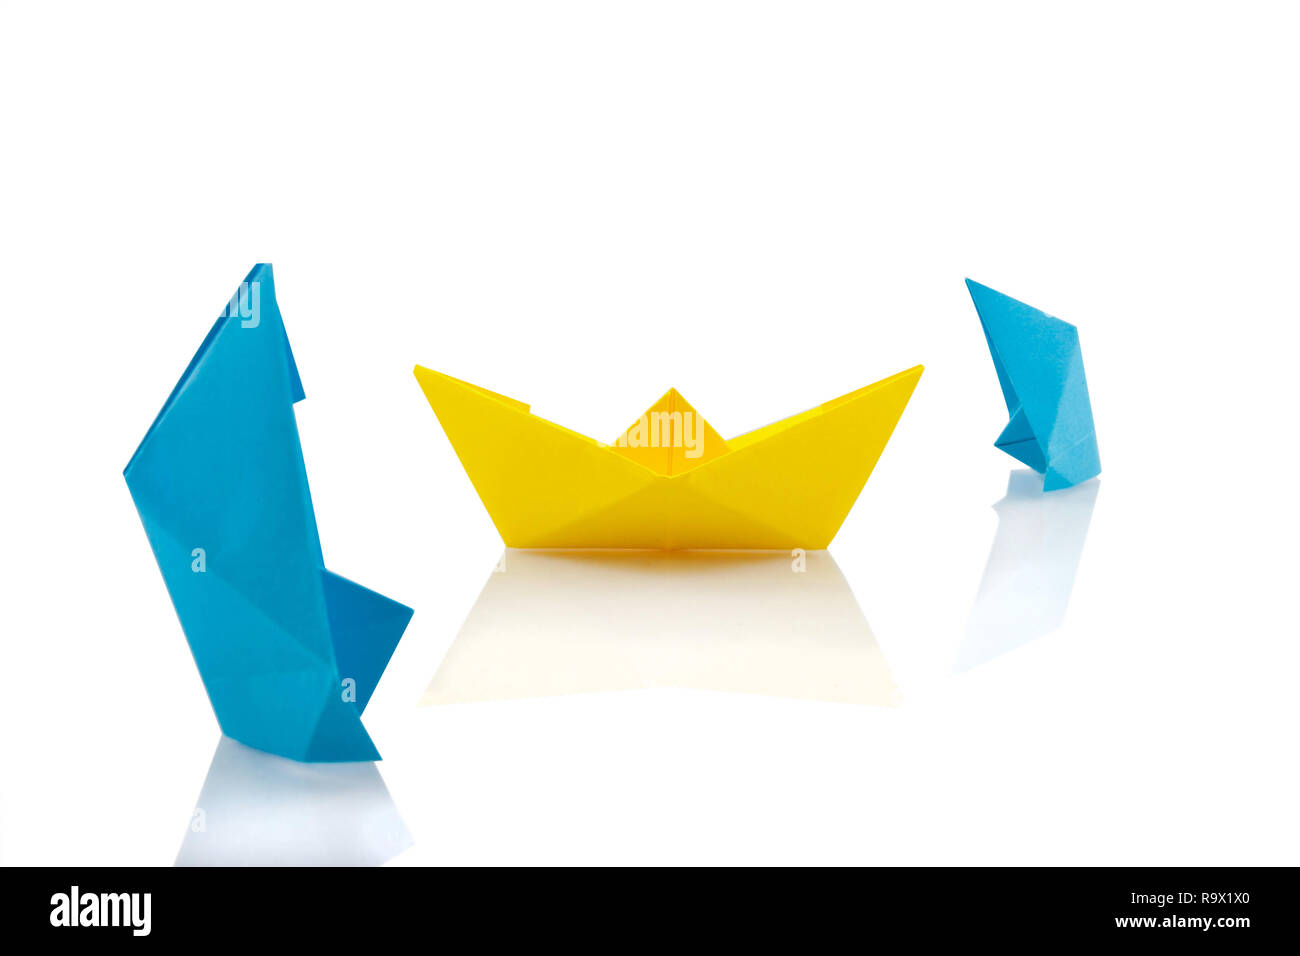 Sinking ships, origami concept Stock Photo